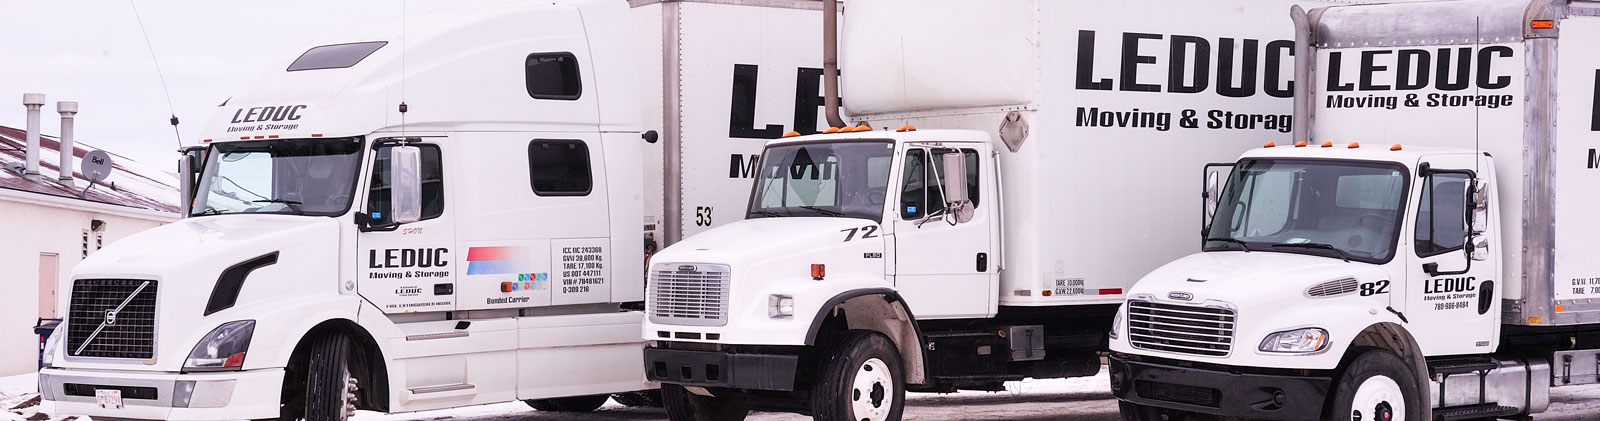 Packing, storing and moving experts in Leduc serving all of North America